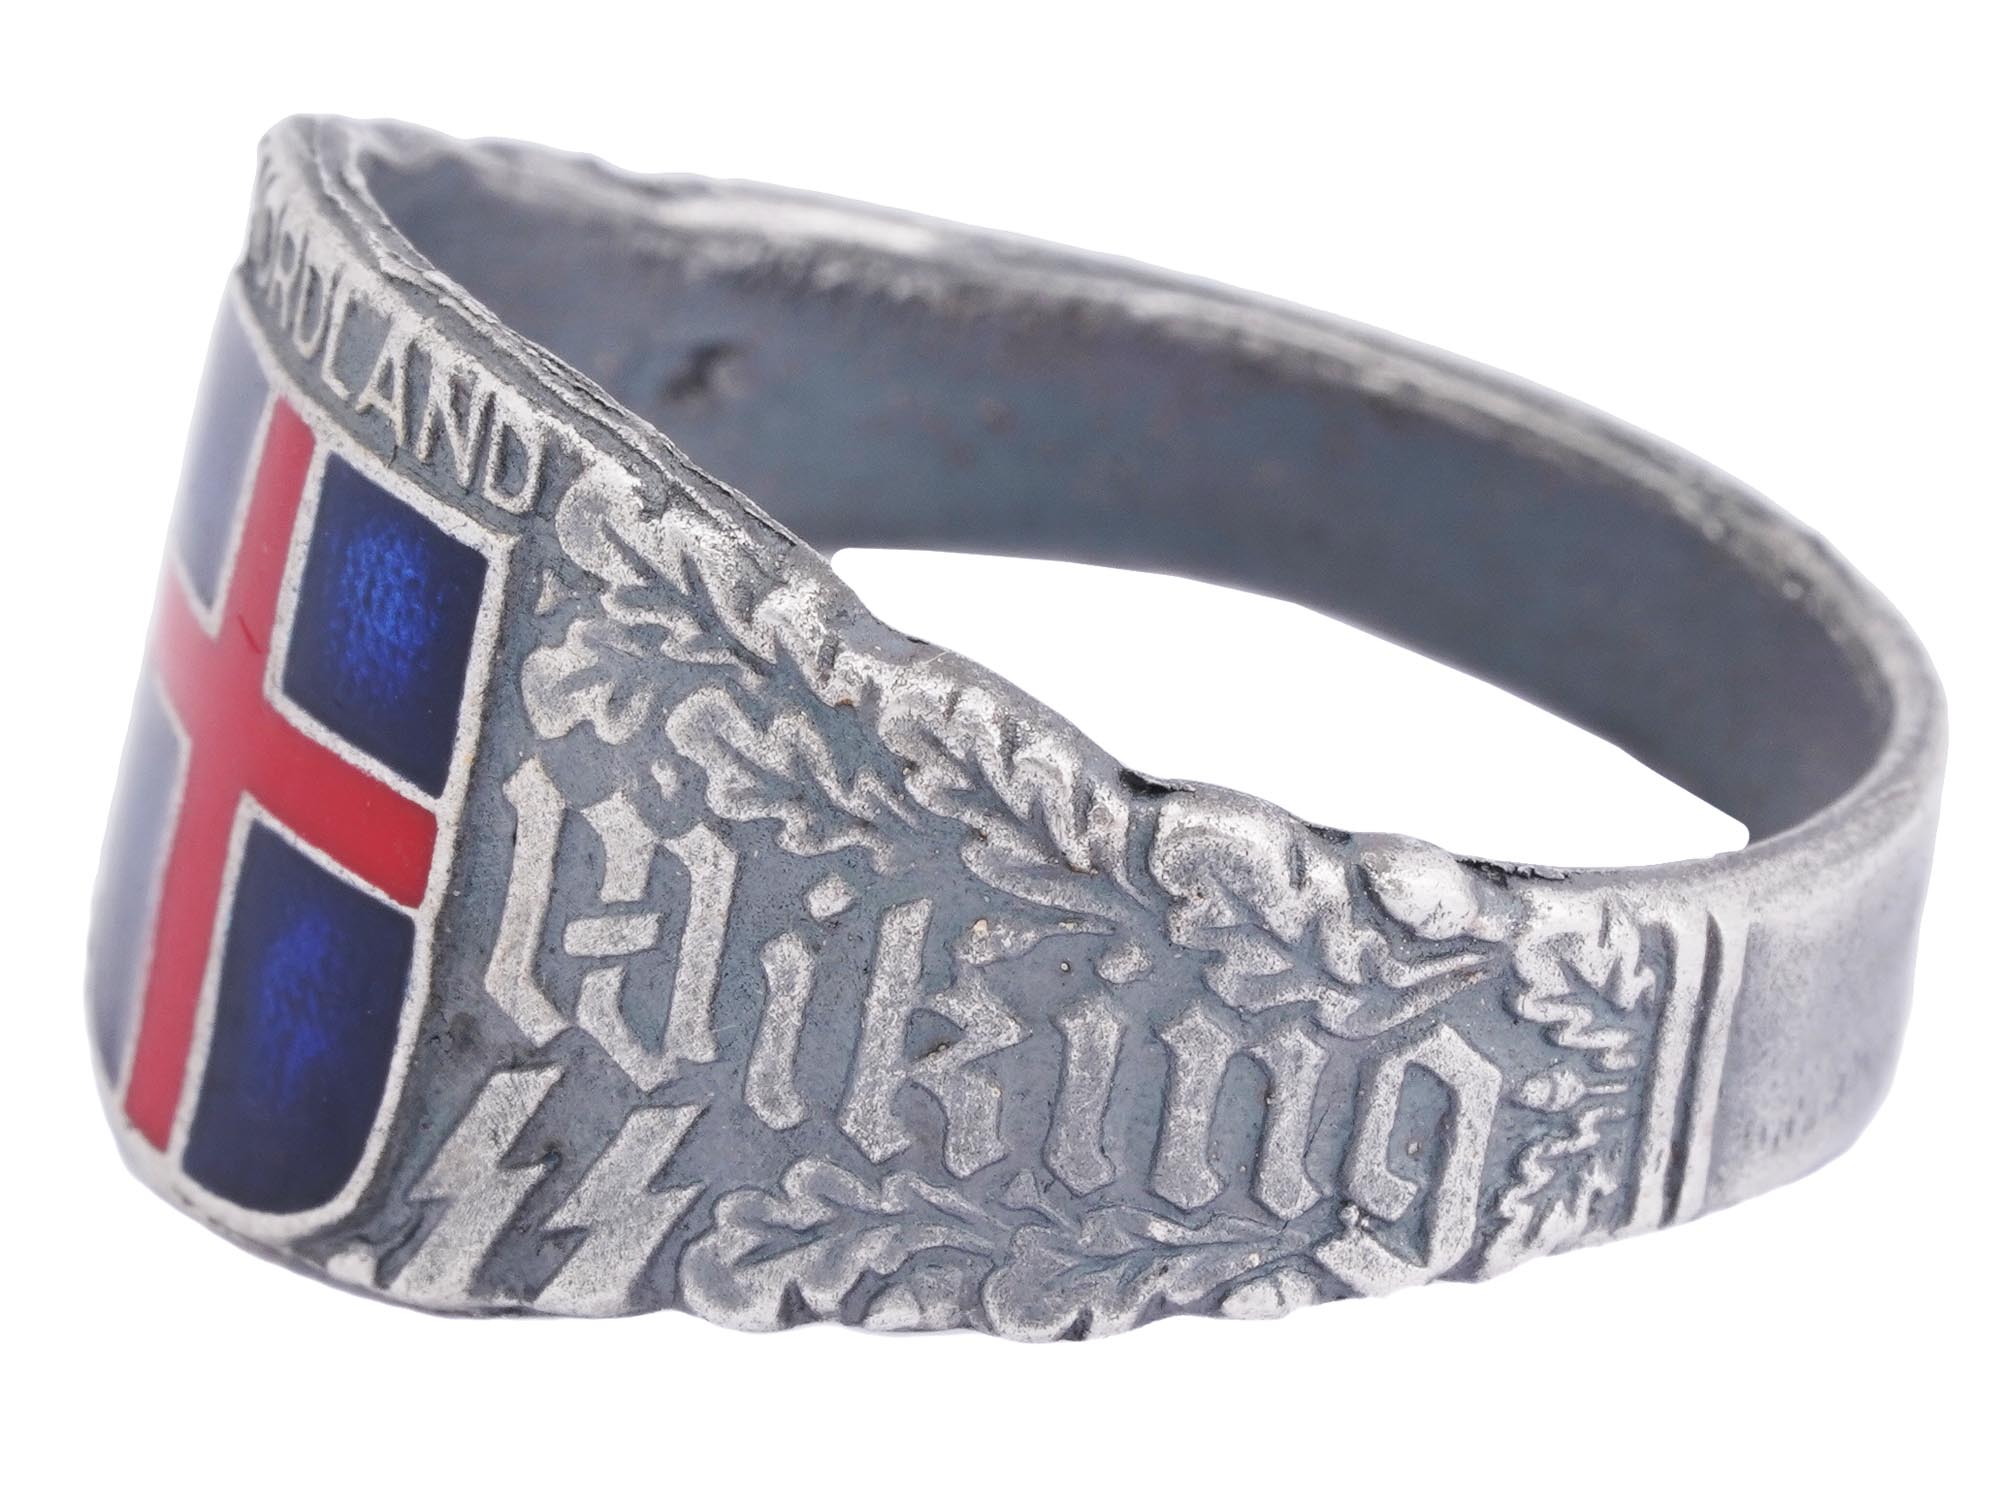 WWII GERMAN WAFFEN SS WIKING NORDLAND SILVER RING PIC-2